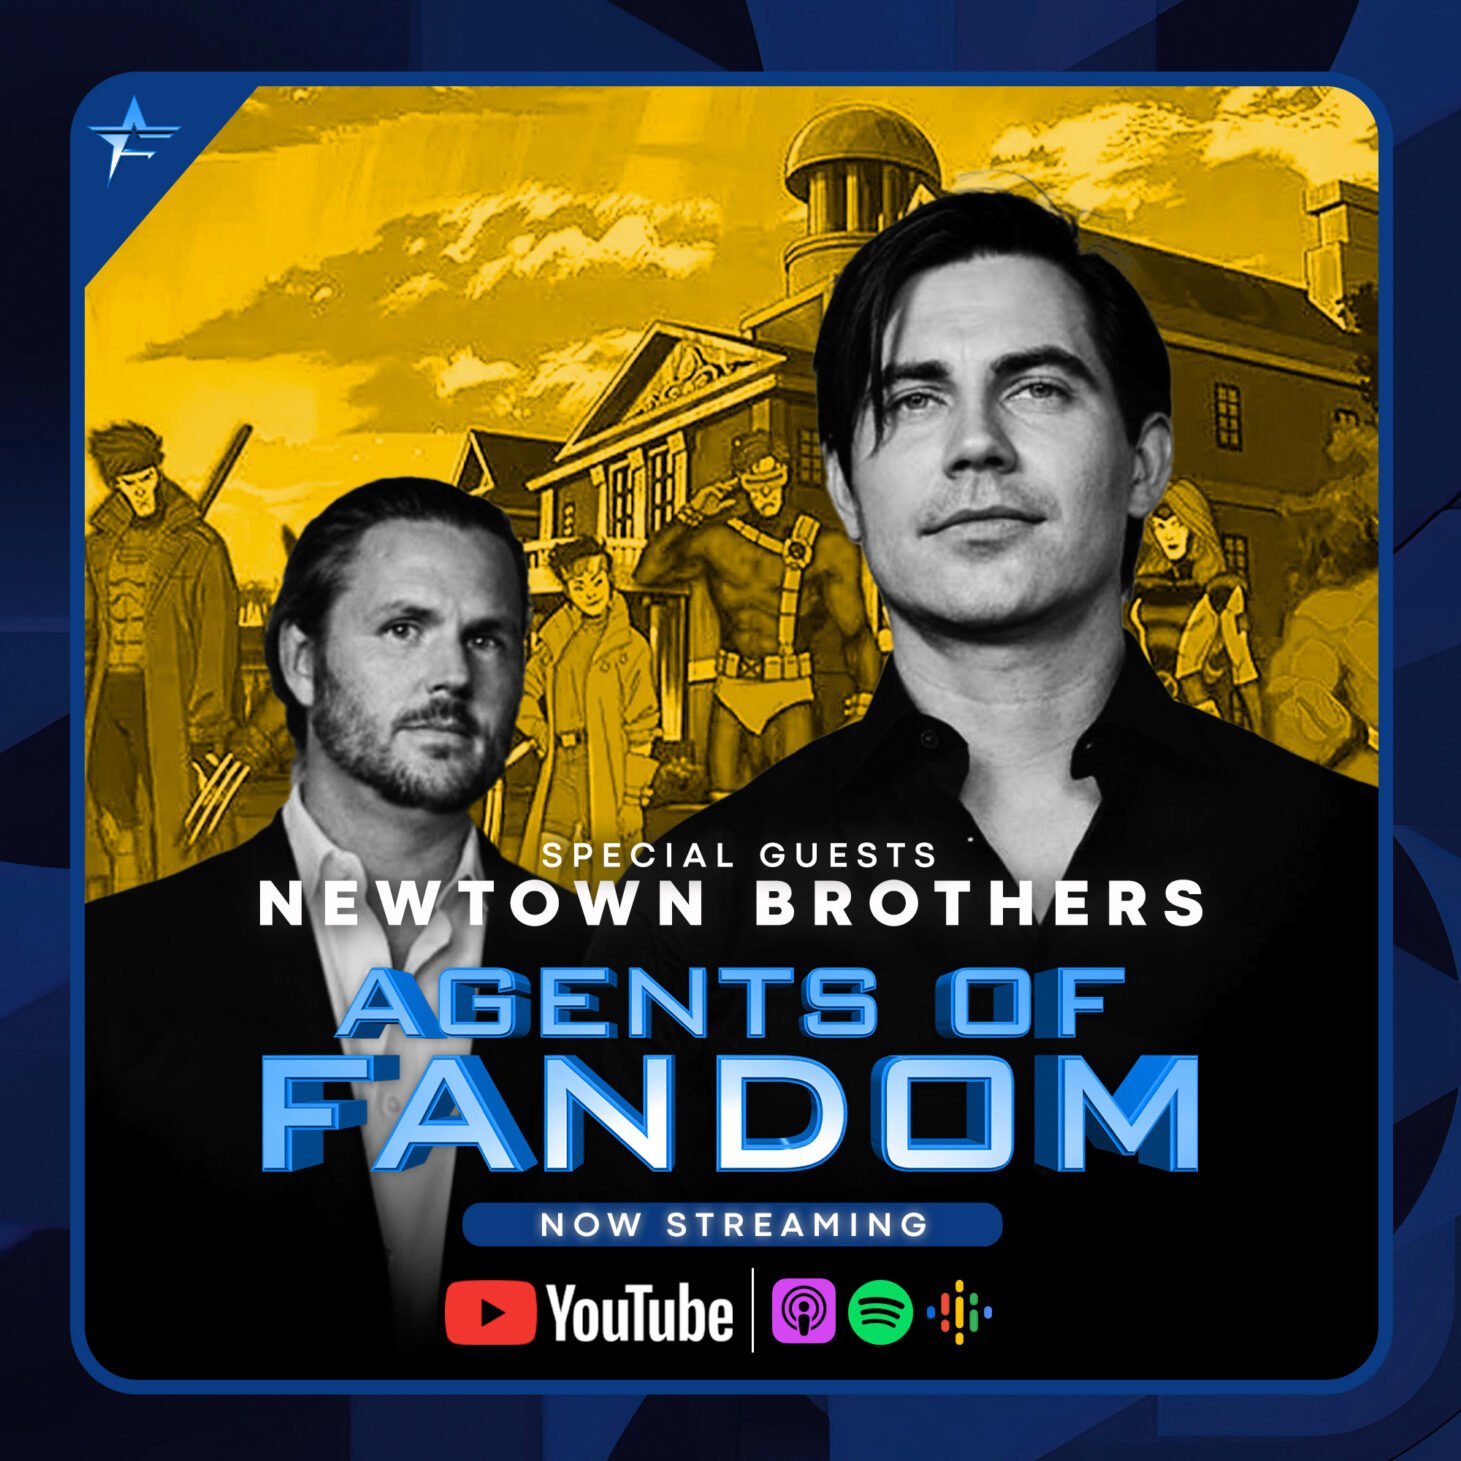 X Men 97s Newport Brothers With the Agents of Fandom | Agents of Fandom